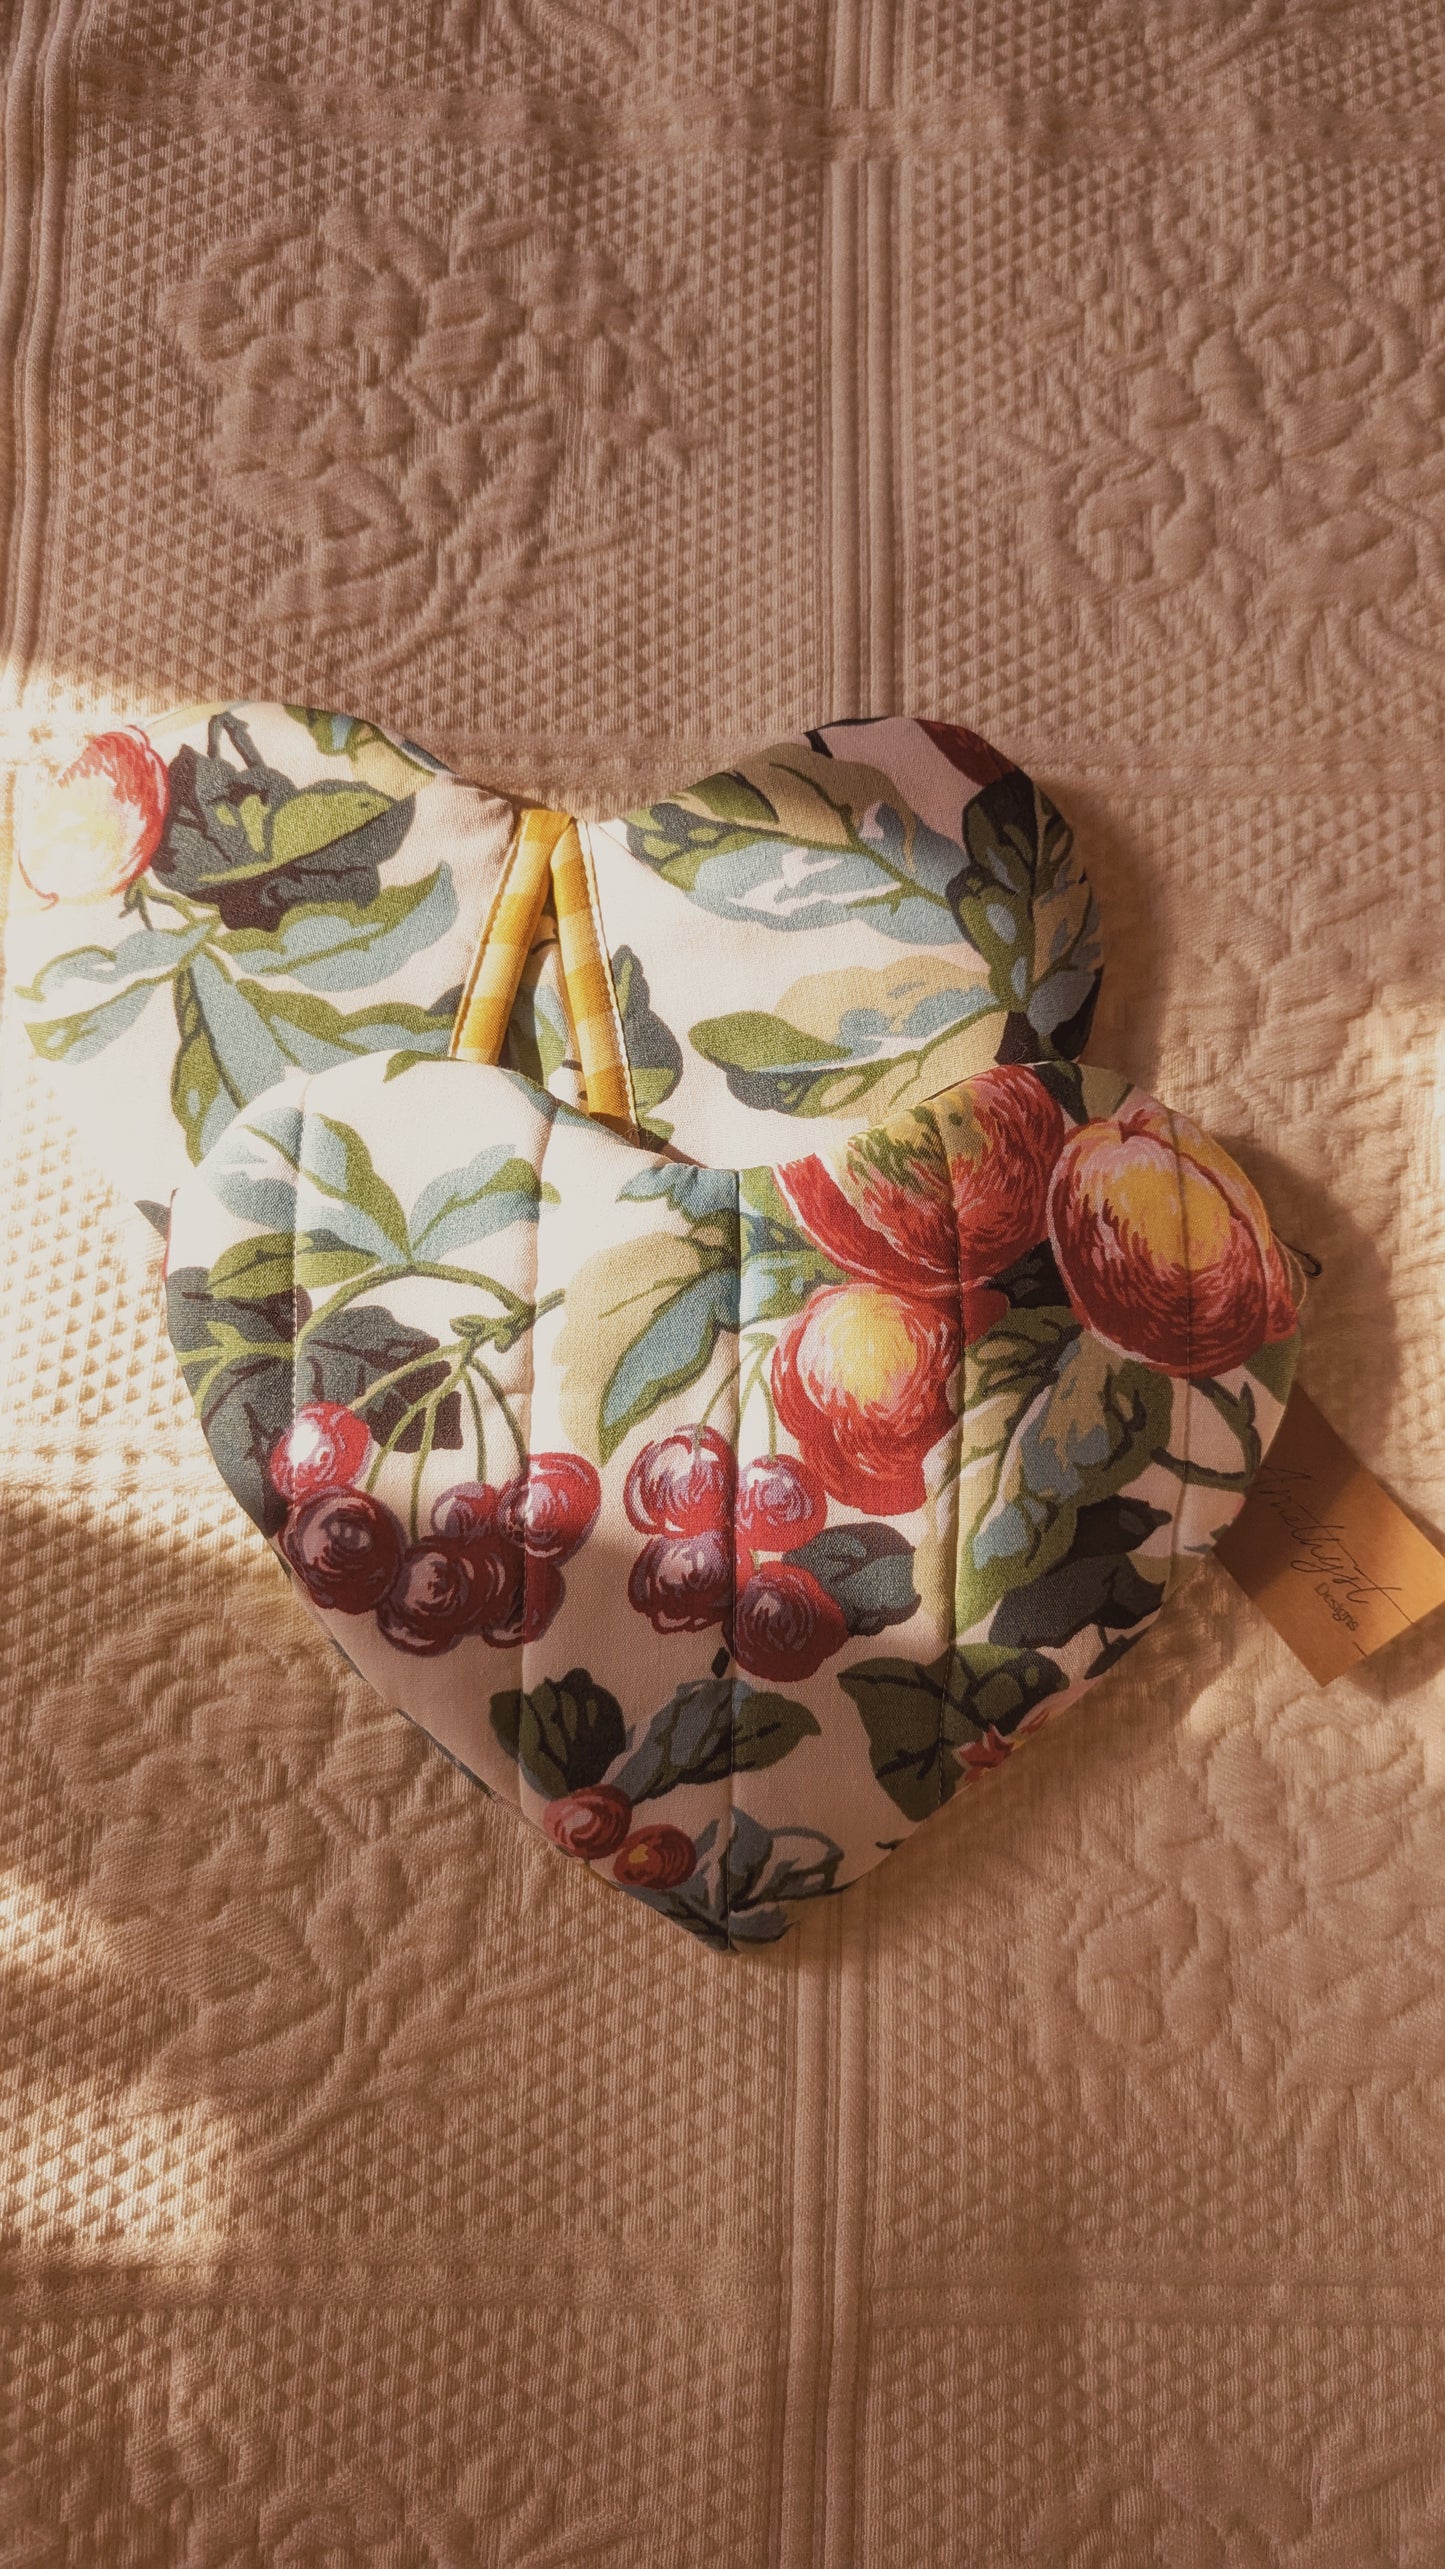 Handmade heart shaped oven mitts - mulberry